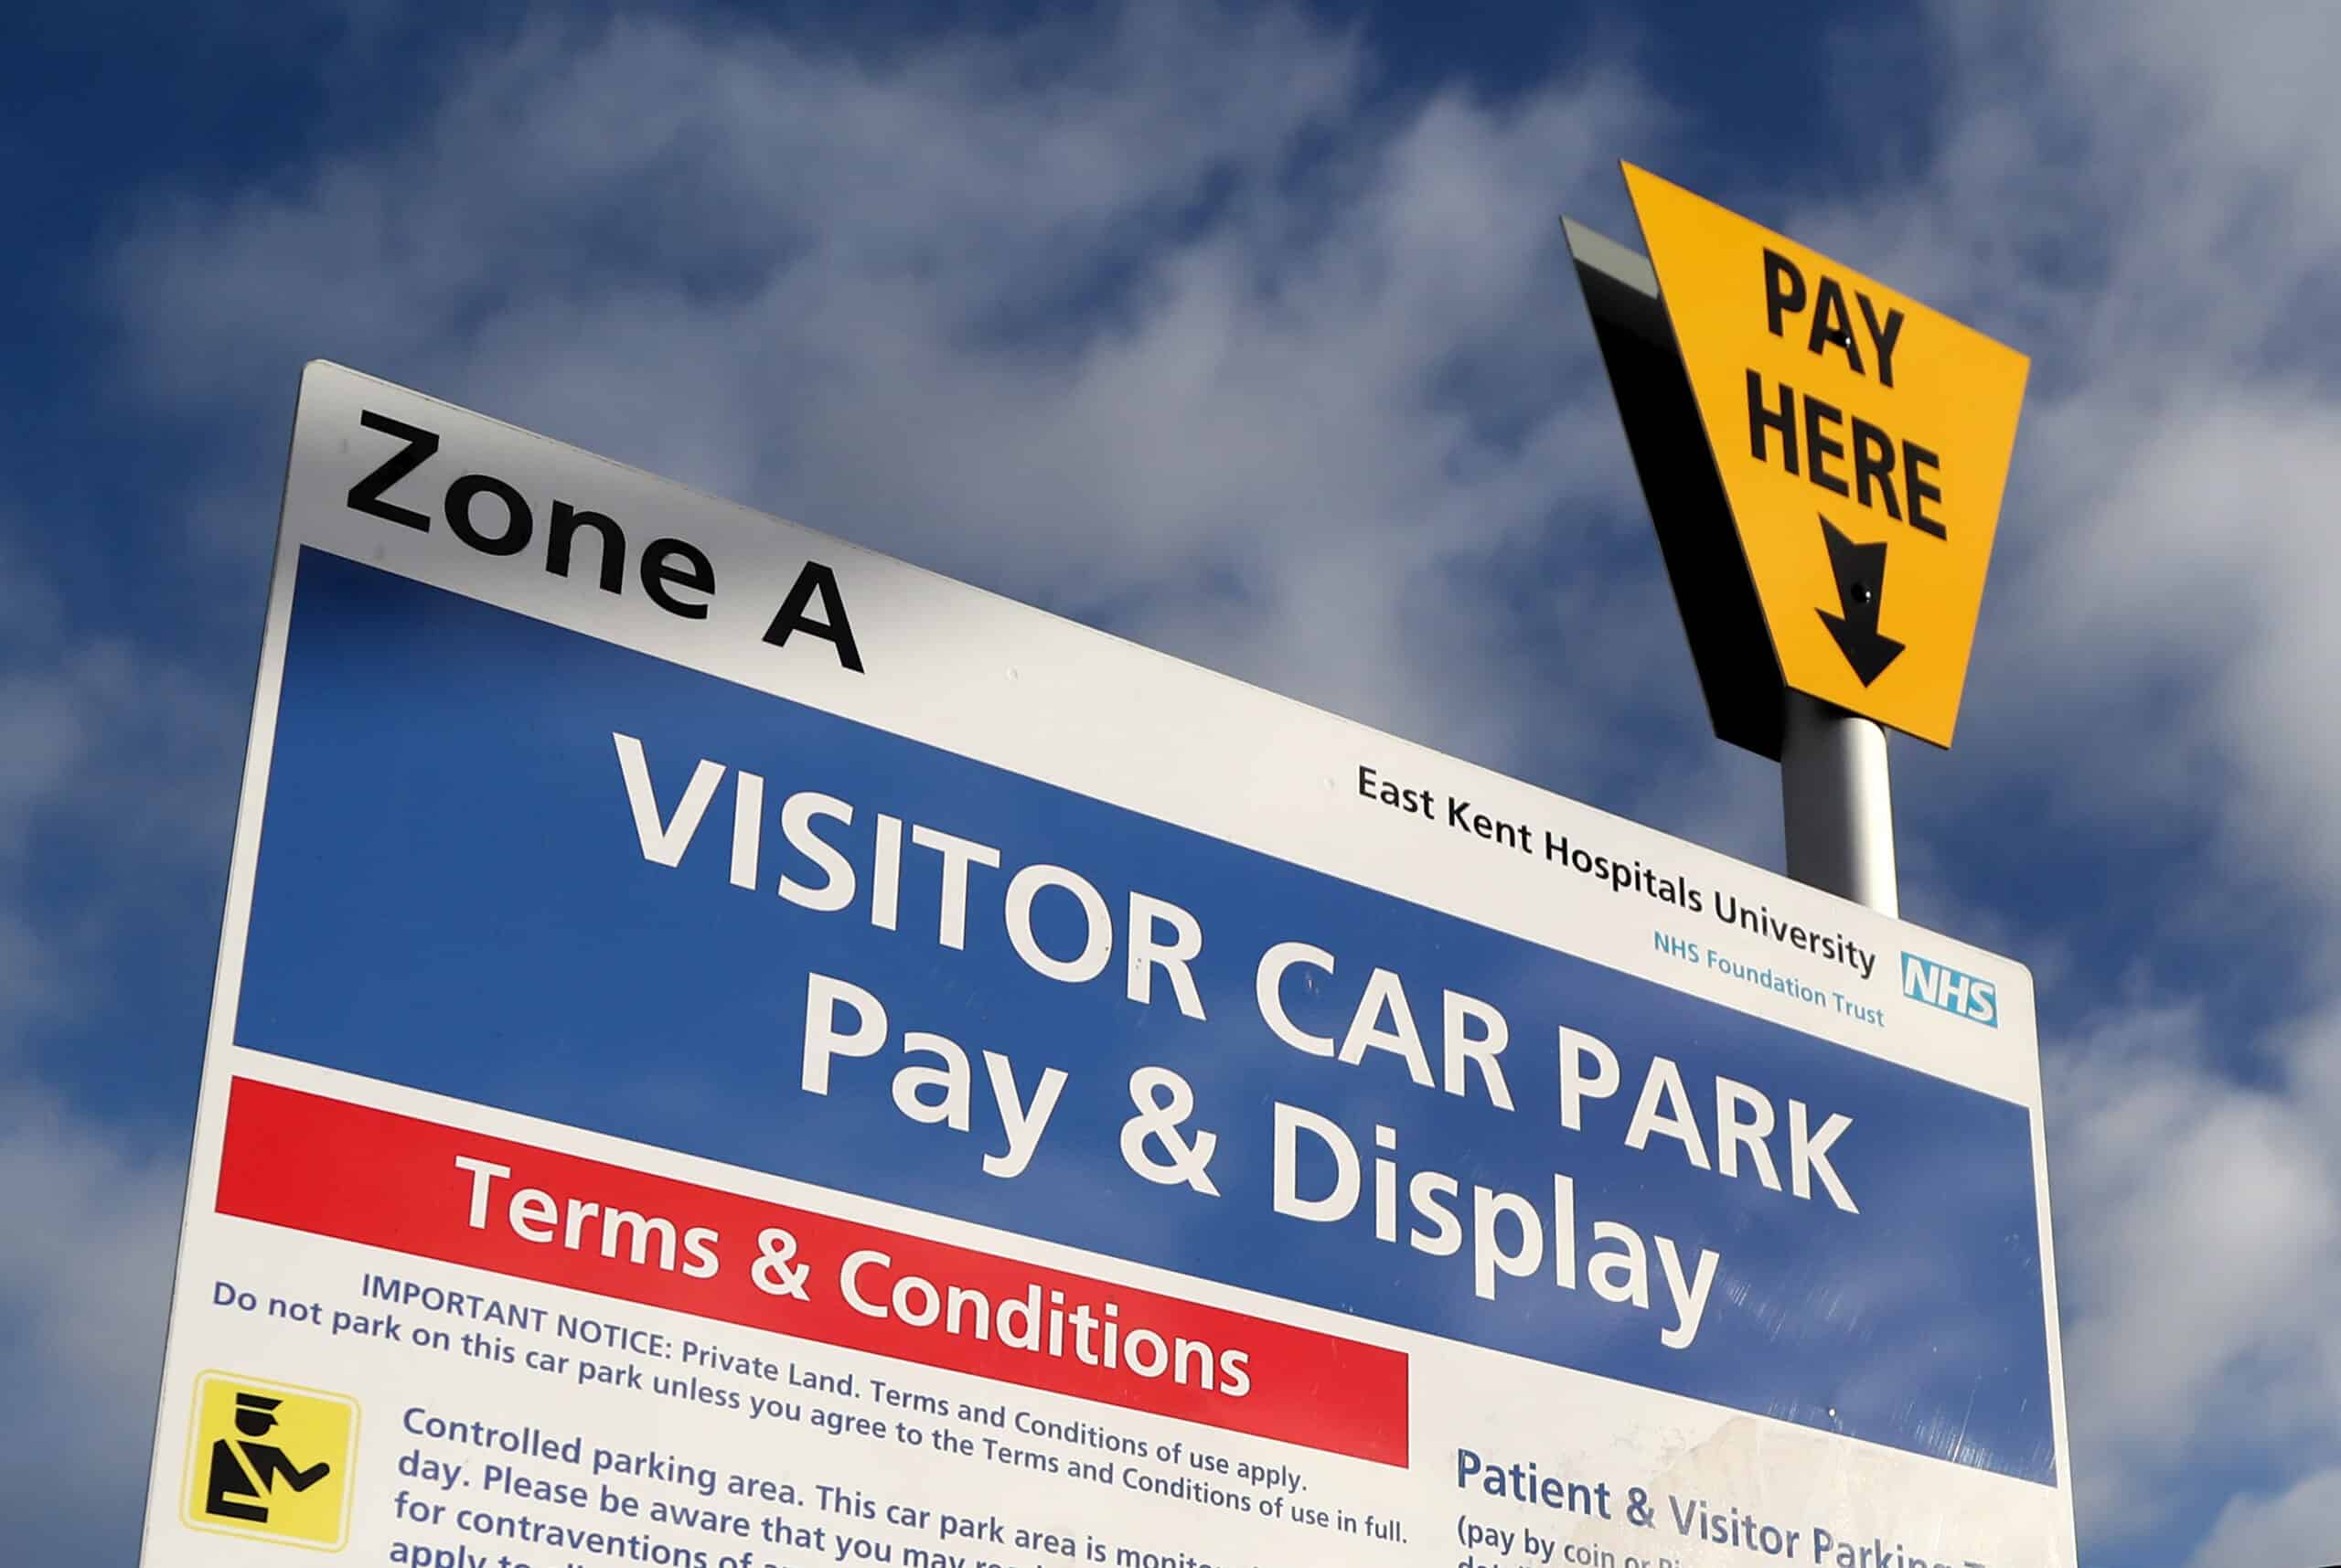 Car parking fees at hospitals soar by 50% in a year, figures show